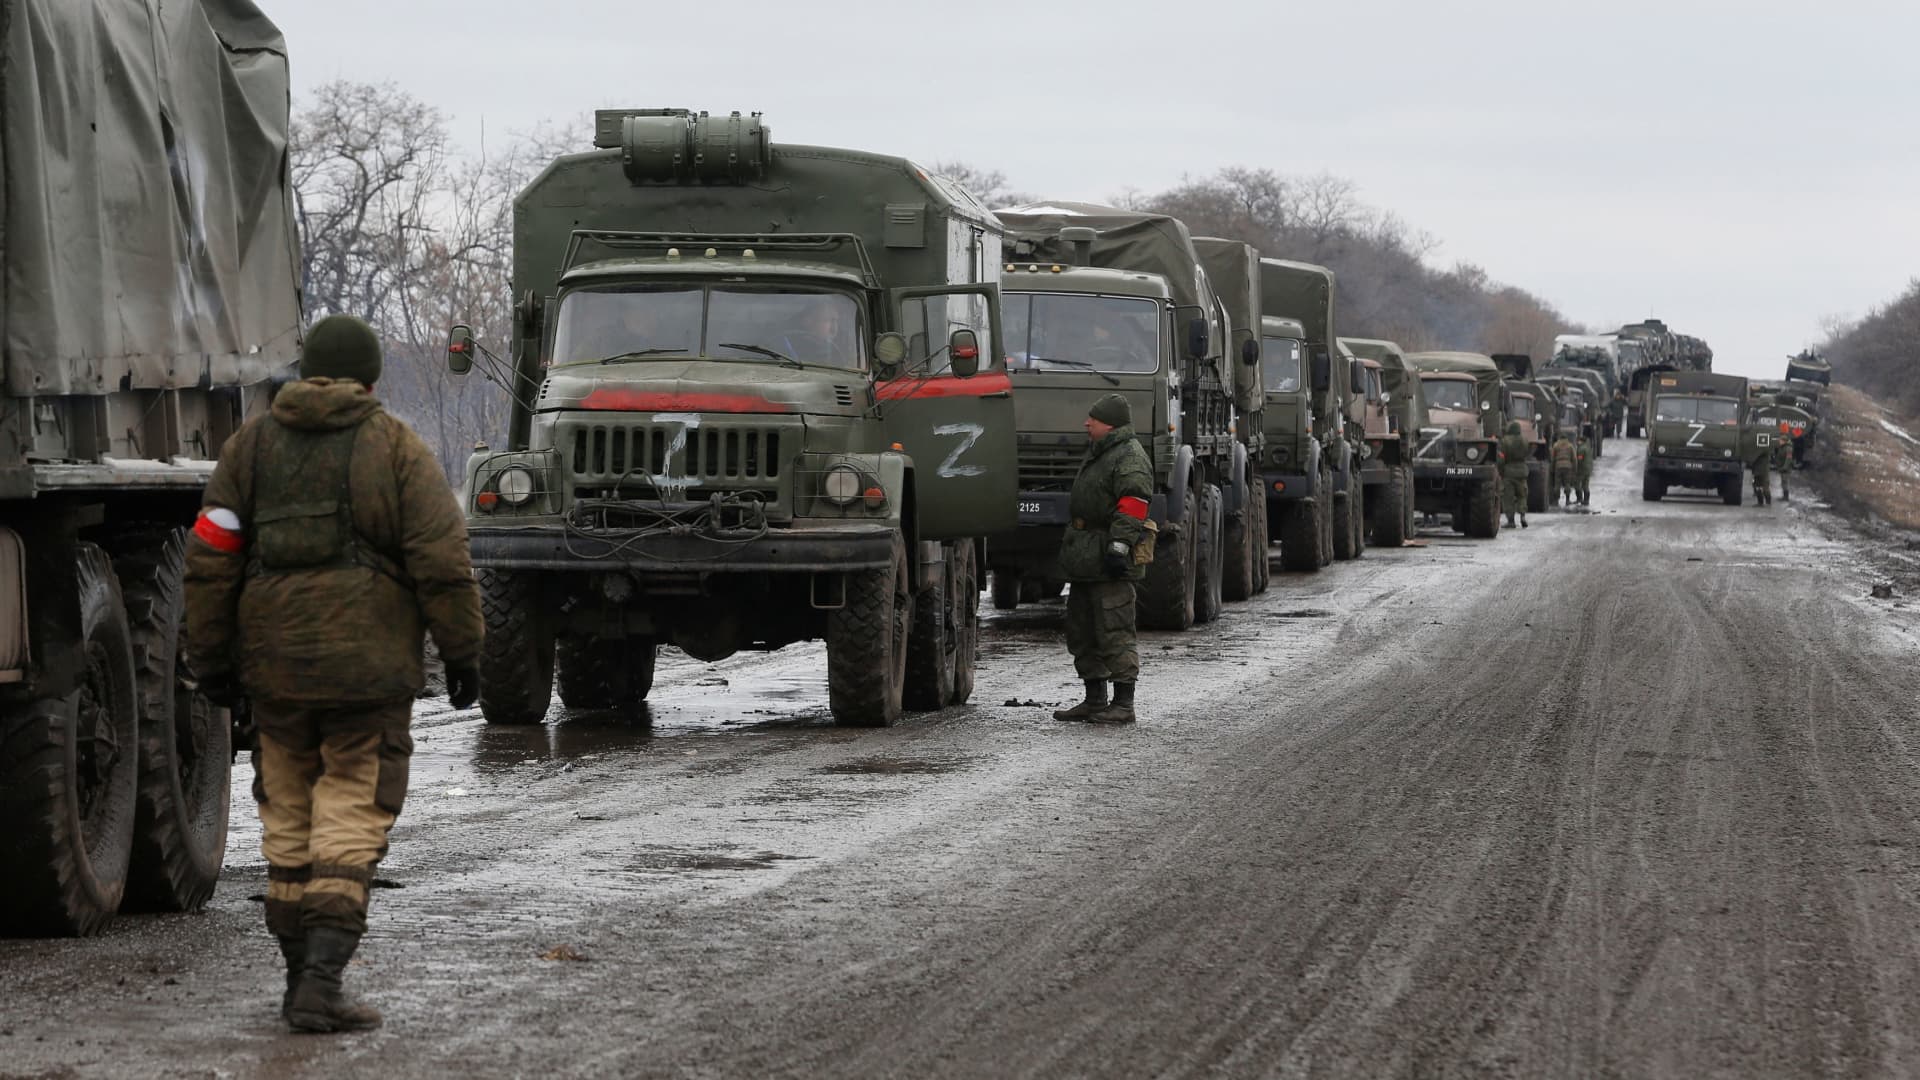 A view shows a military convoy of armed forces of the separatist self-proclaimed Luhansk People's Republic (LNR) on a road in the Luhansk region, Ukraine February 27, 2022.